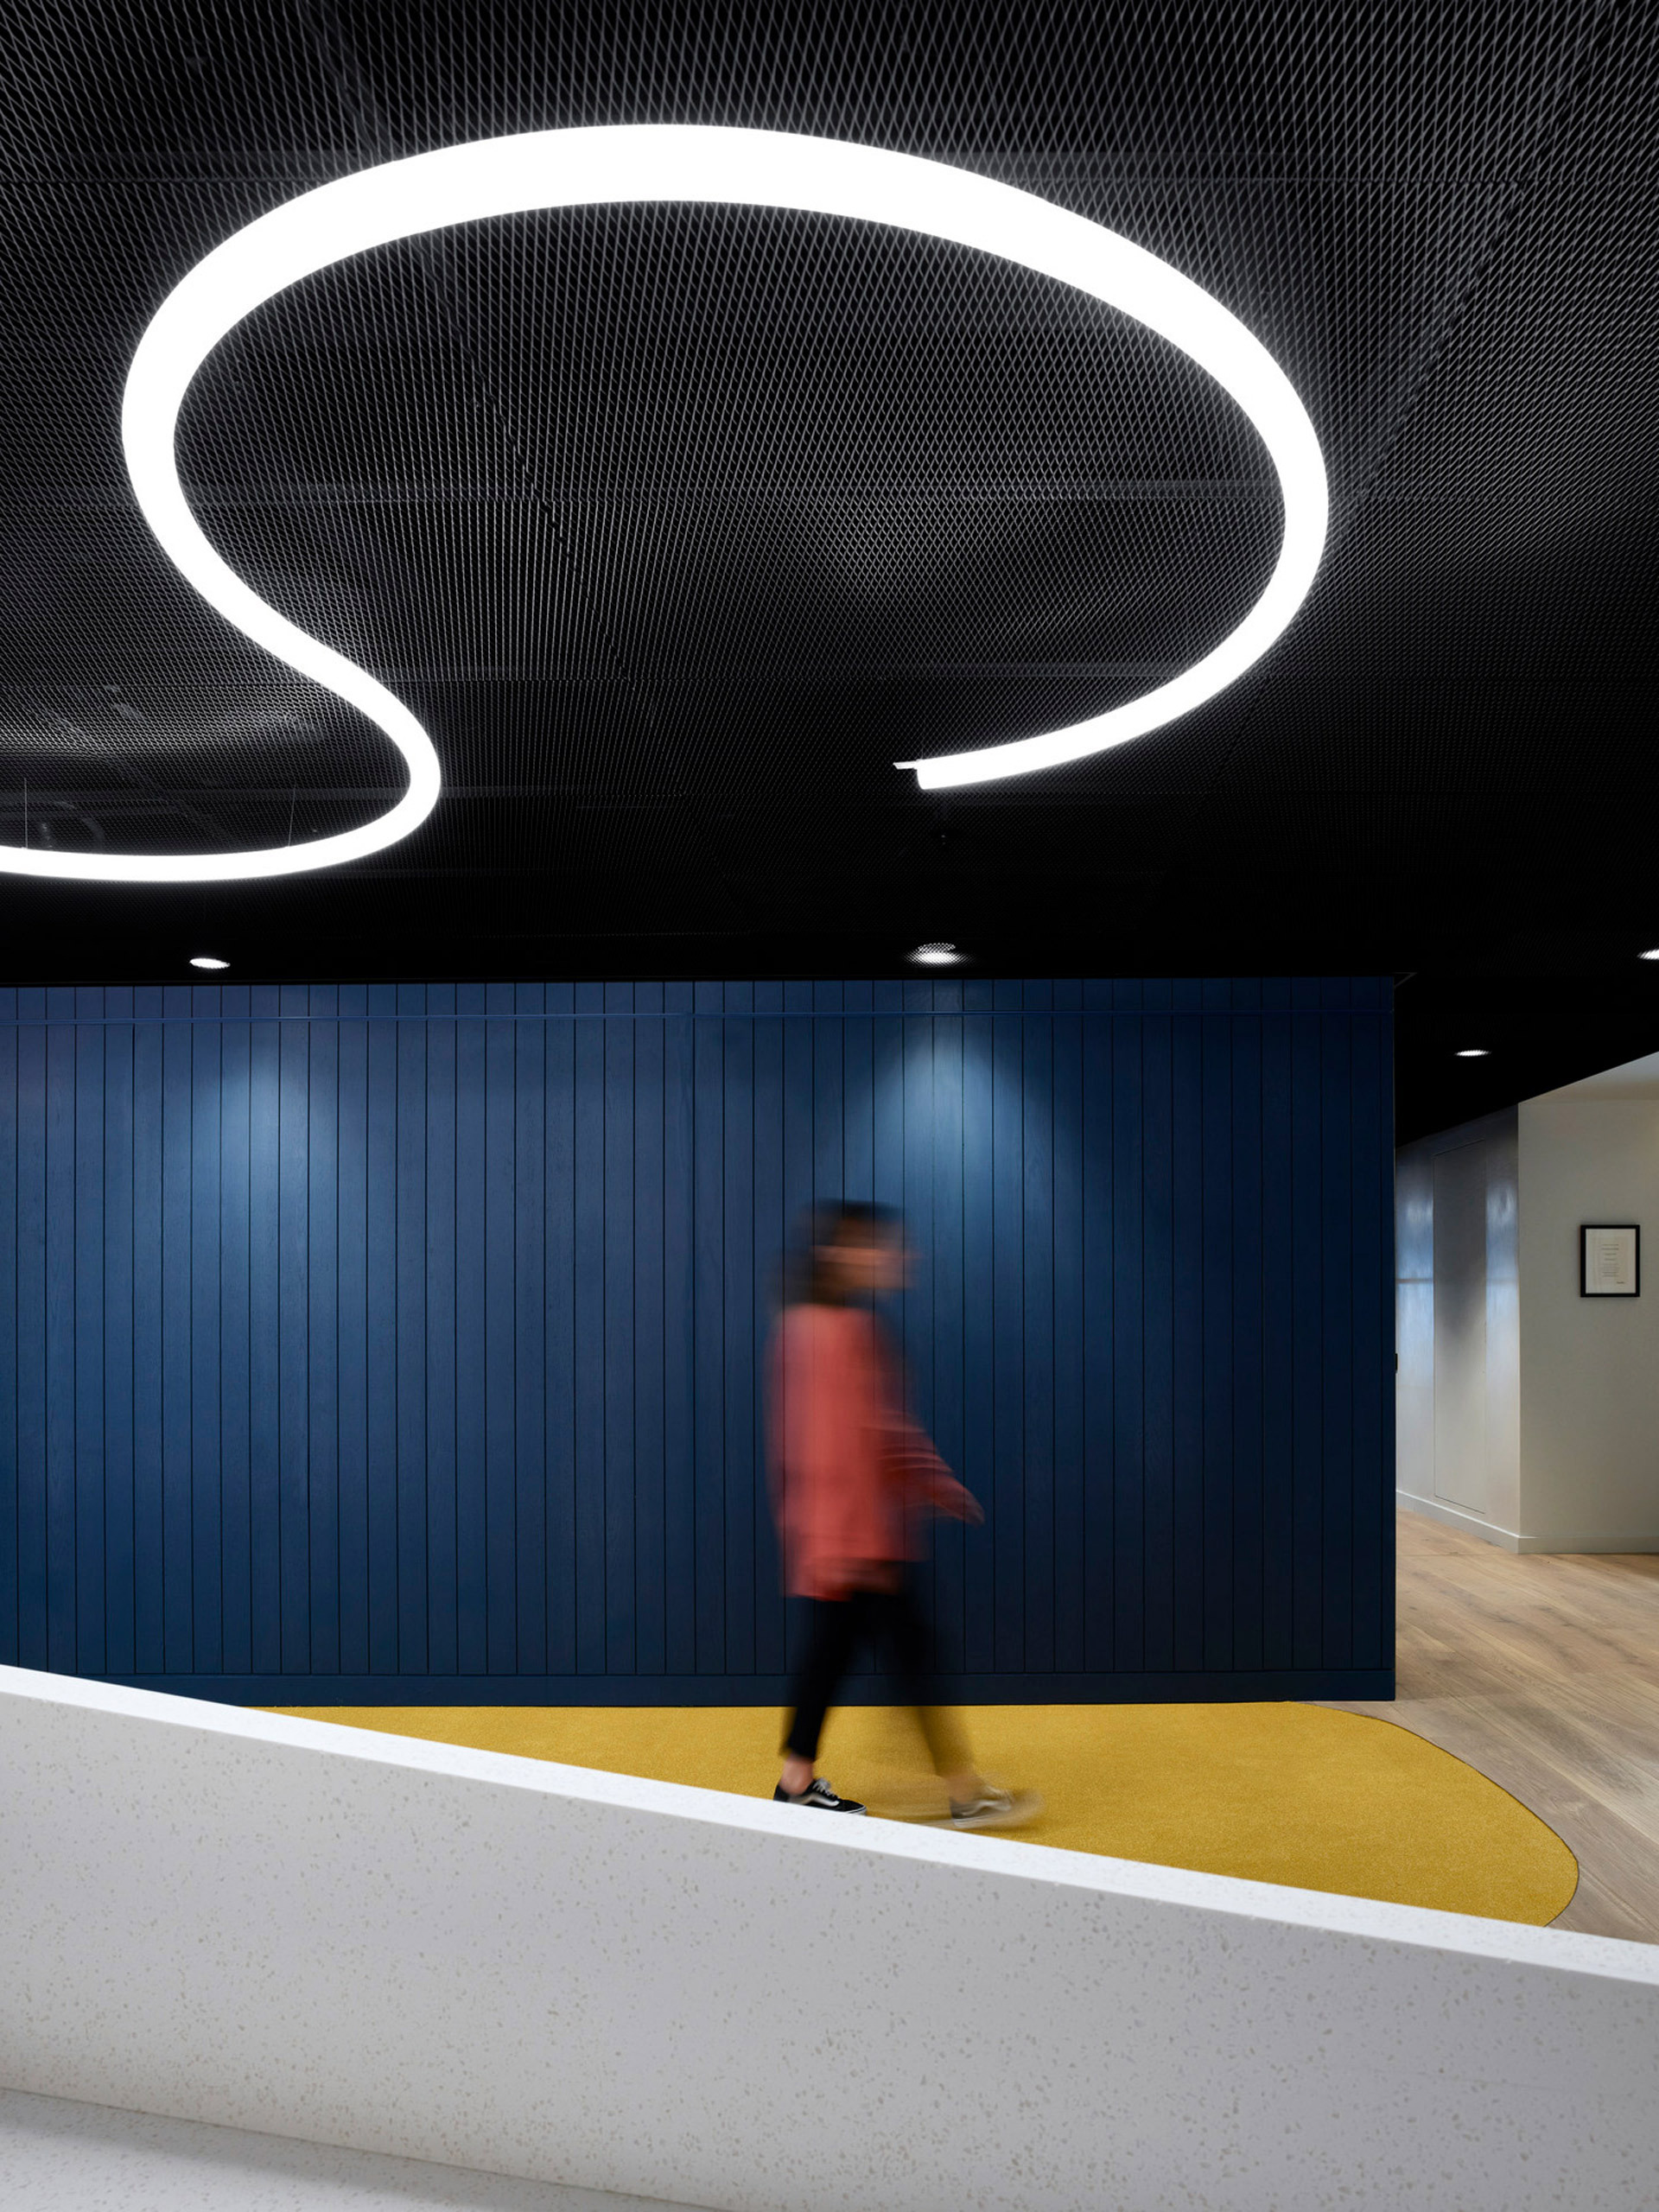 Person walks past a striking reception area characterized by a bold overhead spiral lighting fixture, casting a warm glow on the textured dark ceiling. Below, a curving yellow carpet complements the clean lines of the blue paneled walls and sleek white reception desk.